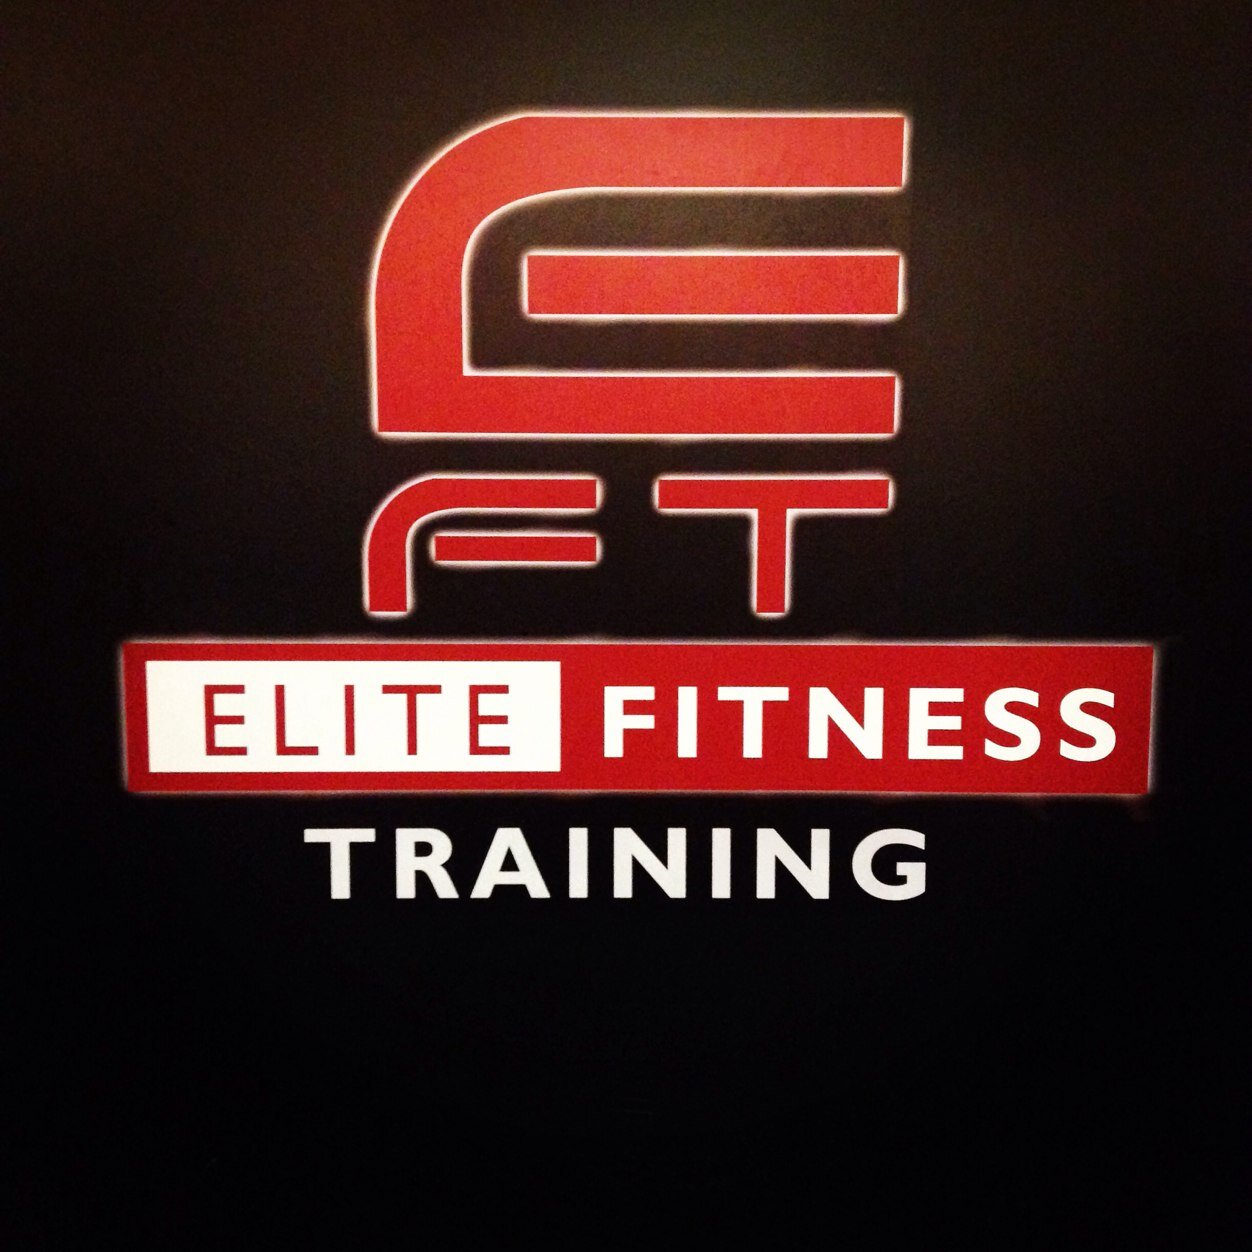 EFT is the BEST 1 on 1 training around giving you a wide variety of trainers to help with every aspect of training!